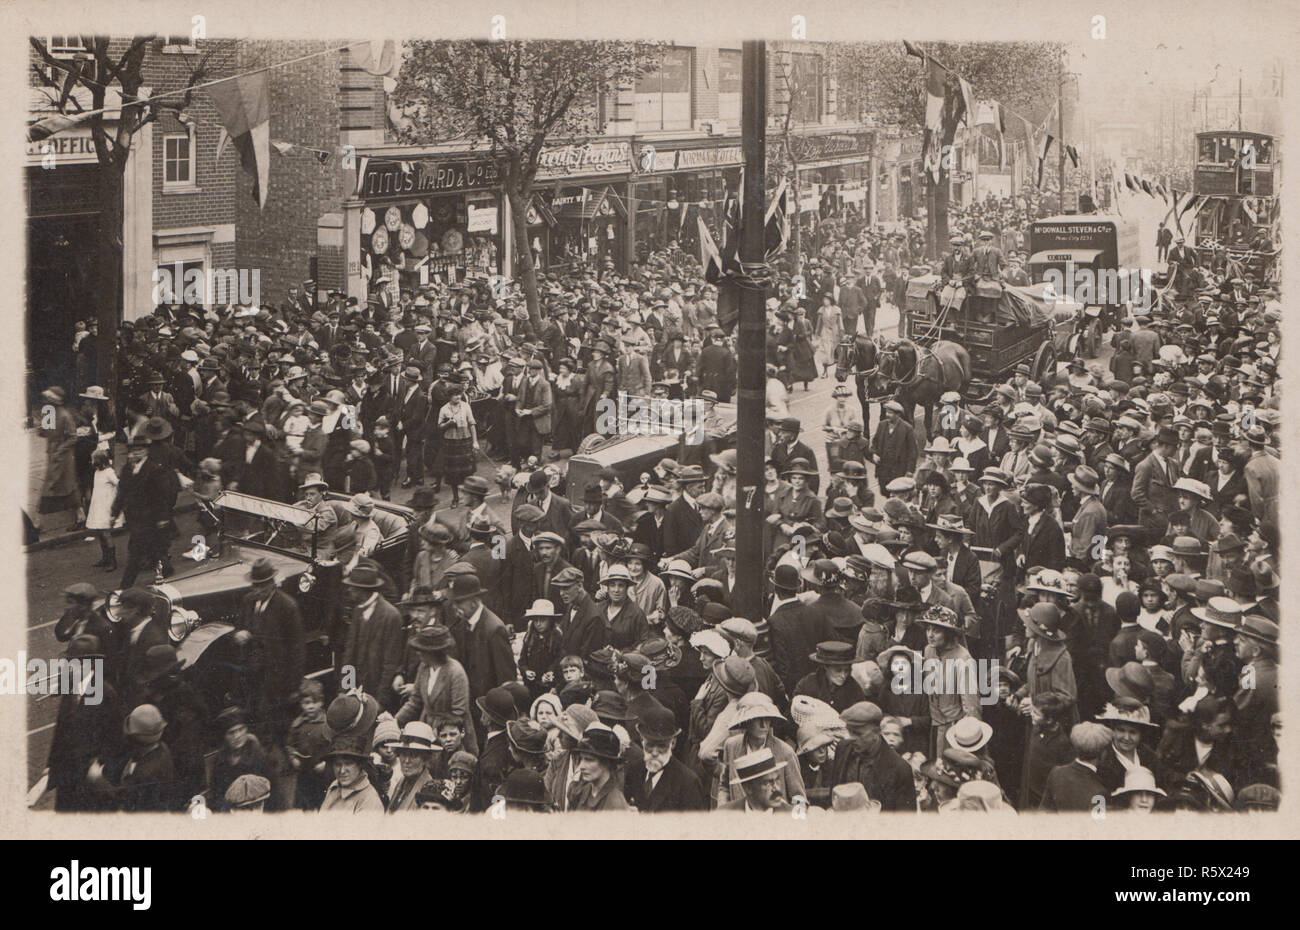 Vintage British Photographic Postcard Showing a Large Public Event With a Procession of Automobiles and Horse Drawn Vehicles. One of The Visible Shops is Titus Ward & Co Ltd. One of The Vehicles Has a Sign For McDowall Steven & Co Ltd. Stock Photo